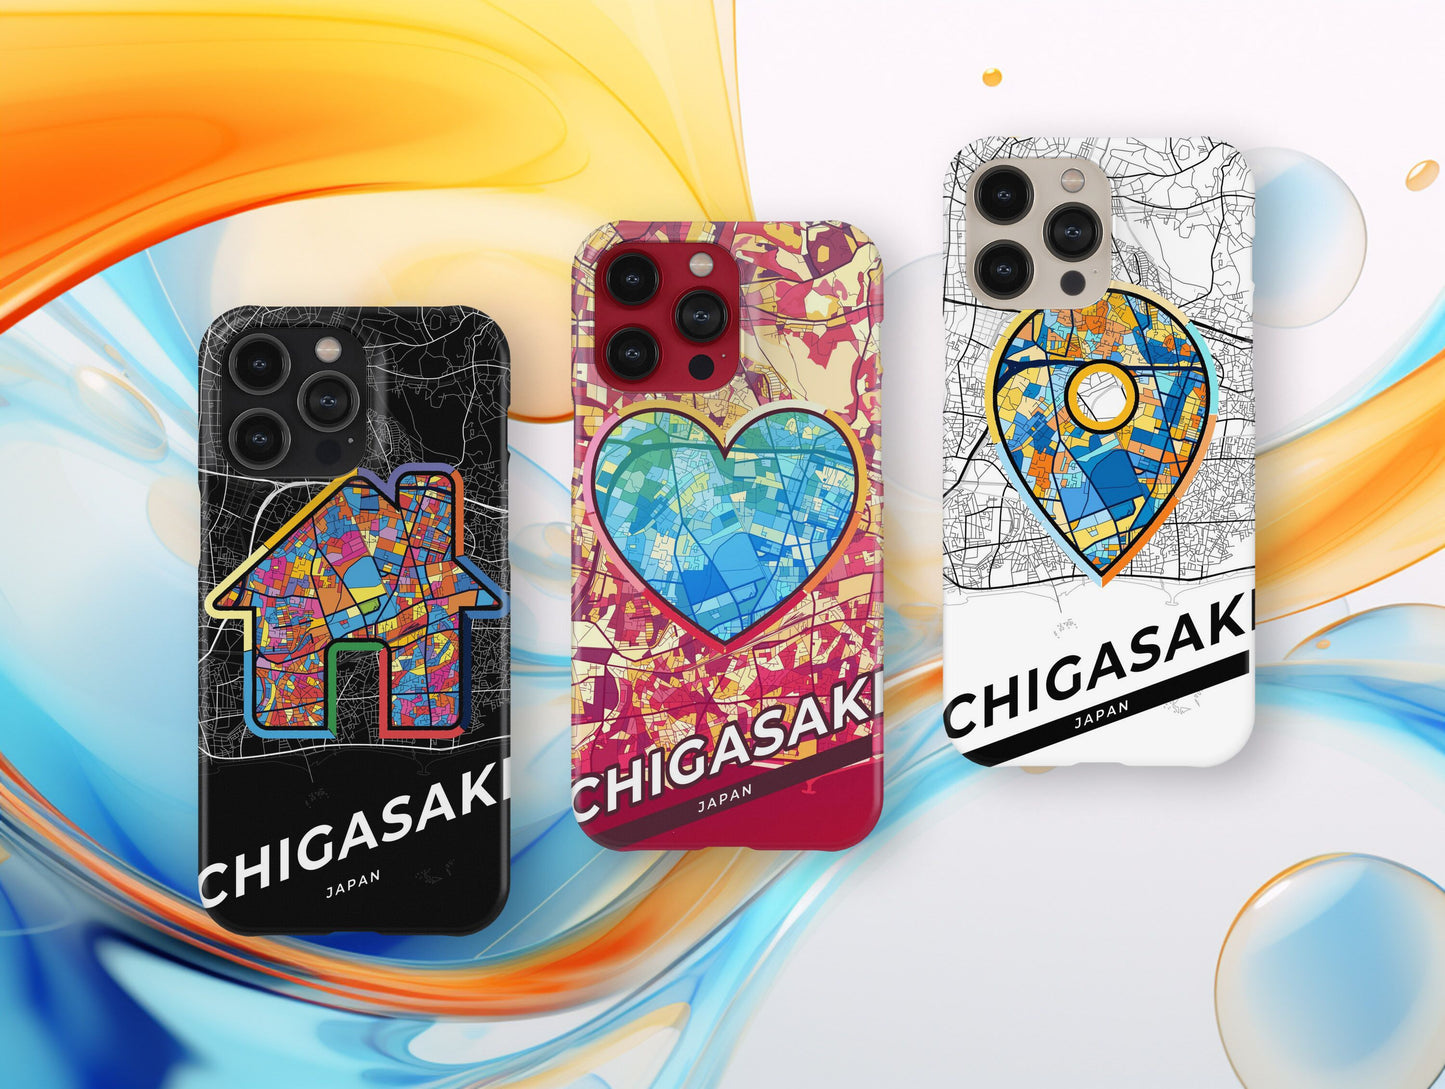 Chigasaki Japan slim phone case with colorful icon. Birthday, wedding or housewarming gift. Couple match cases.